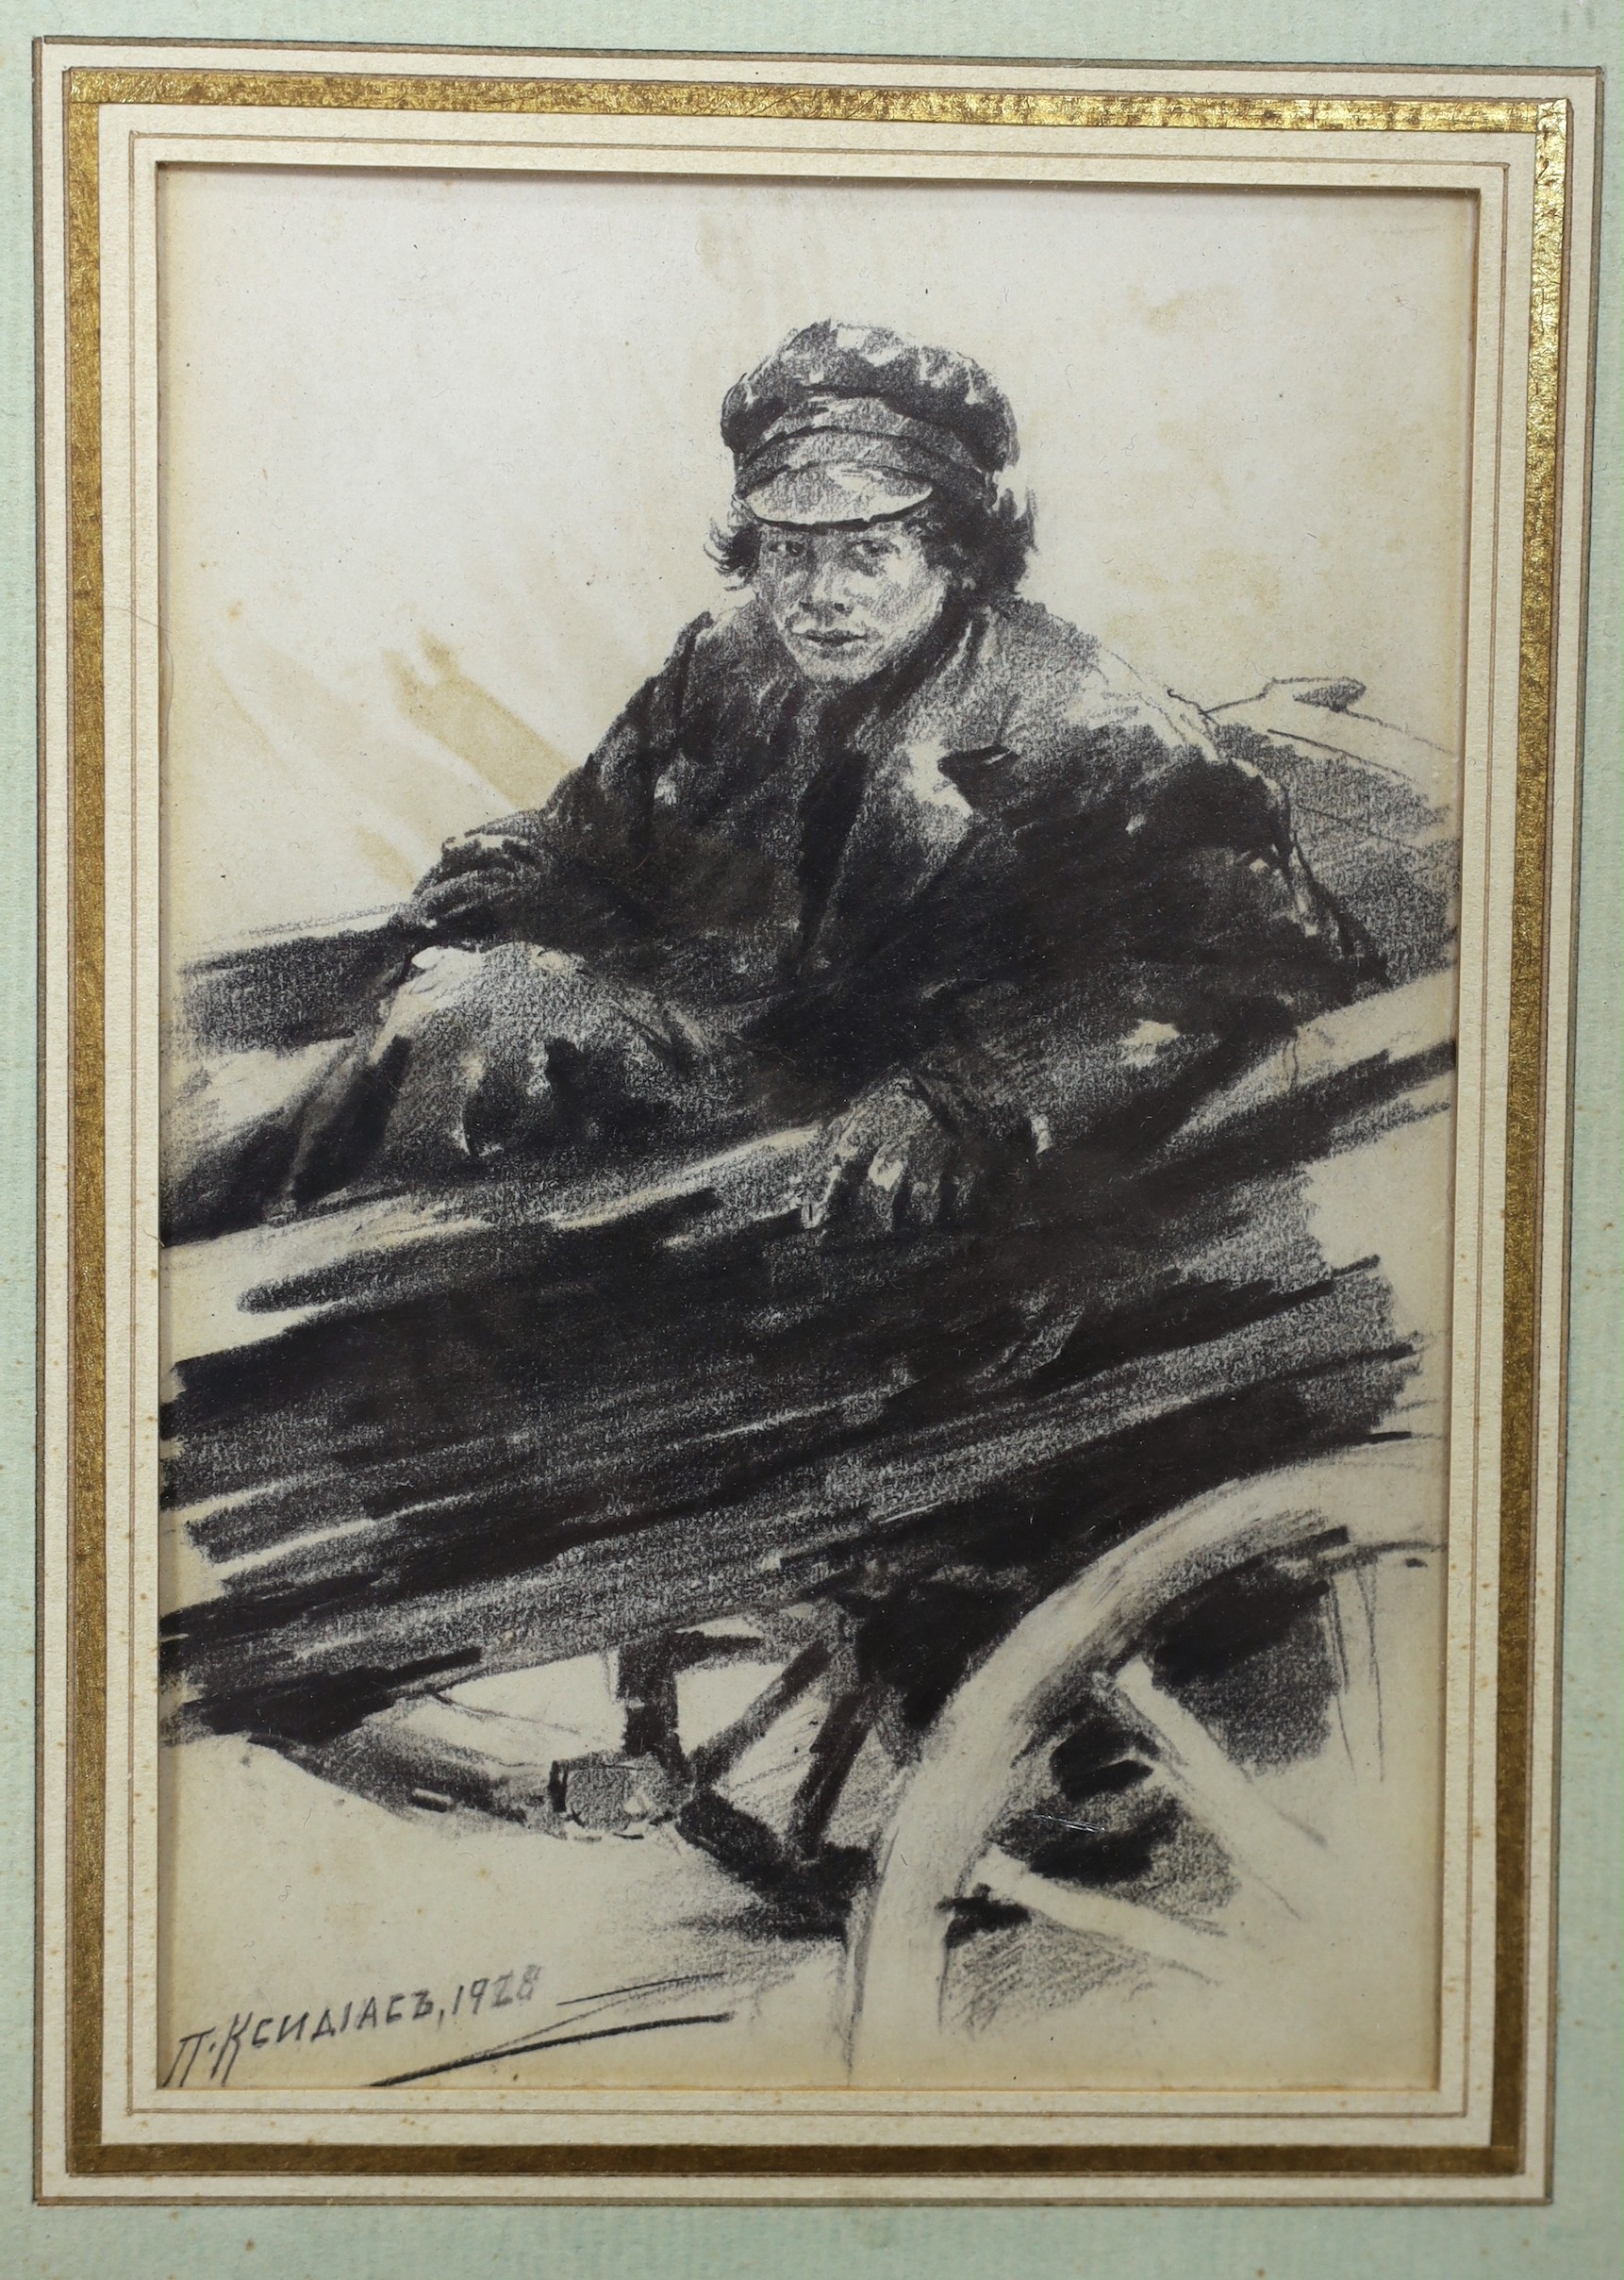 Attributed to Pericles Spiridonovich Ksidias (Greek, 1872-1942), pencil drawing, Figure in a cart, signed and dated 1928, 15 x 10.5cm